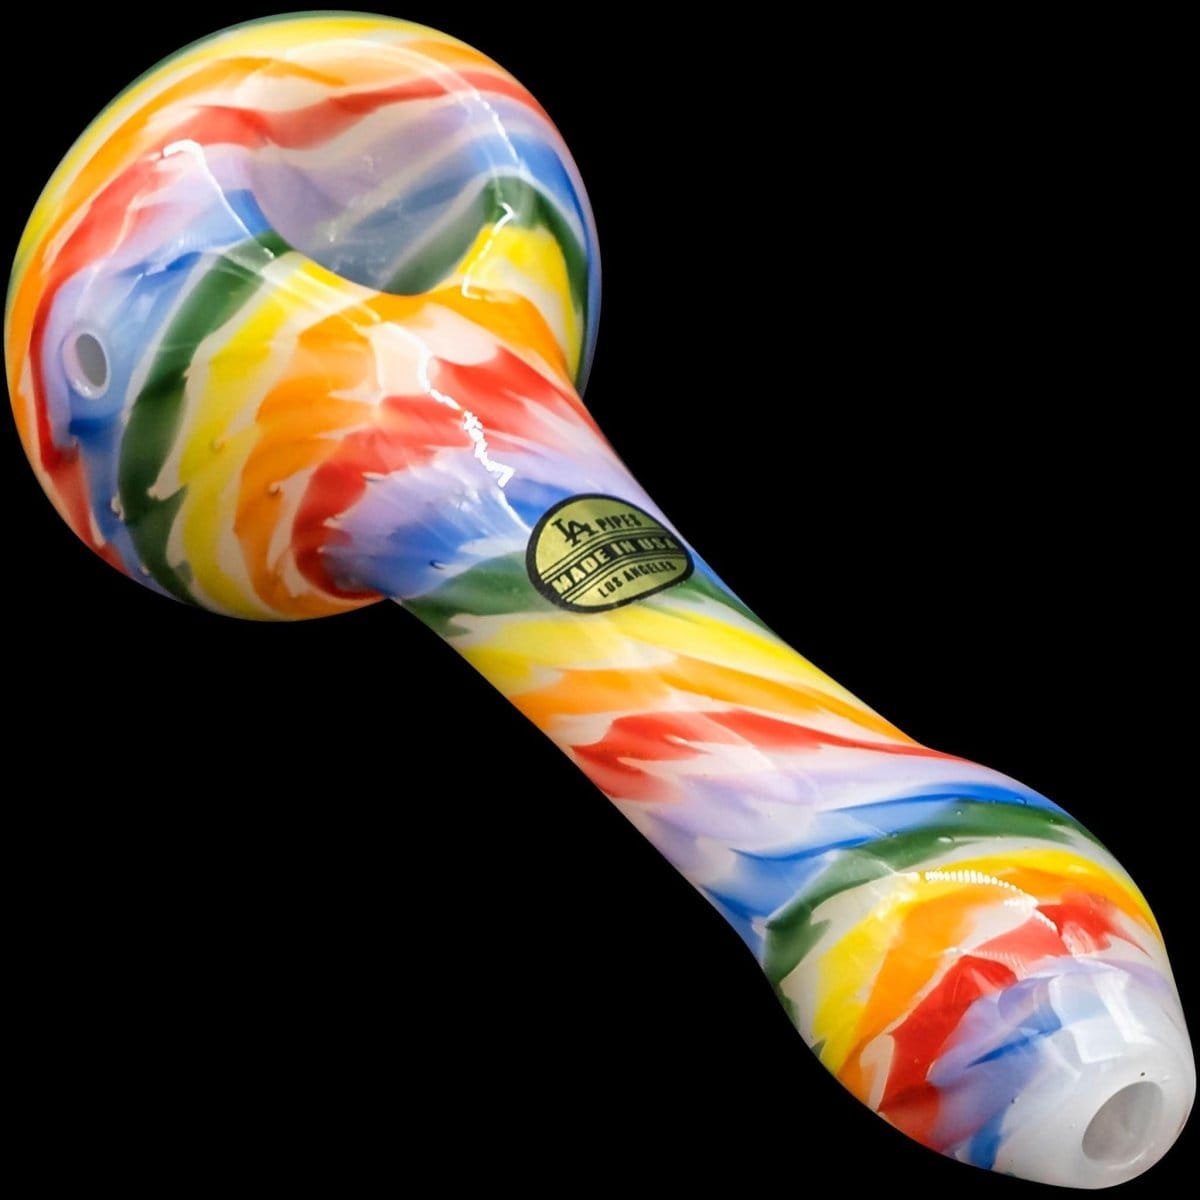 LA Pipes Hand Pipe "Rainbow Tie-Dye" Glass Spoon Pipe on White